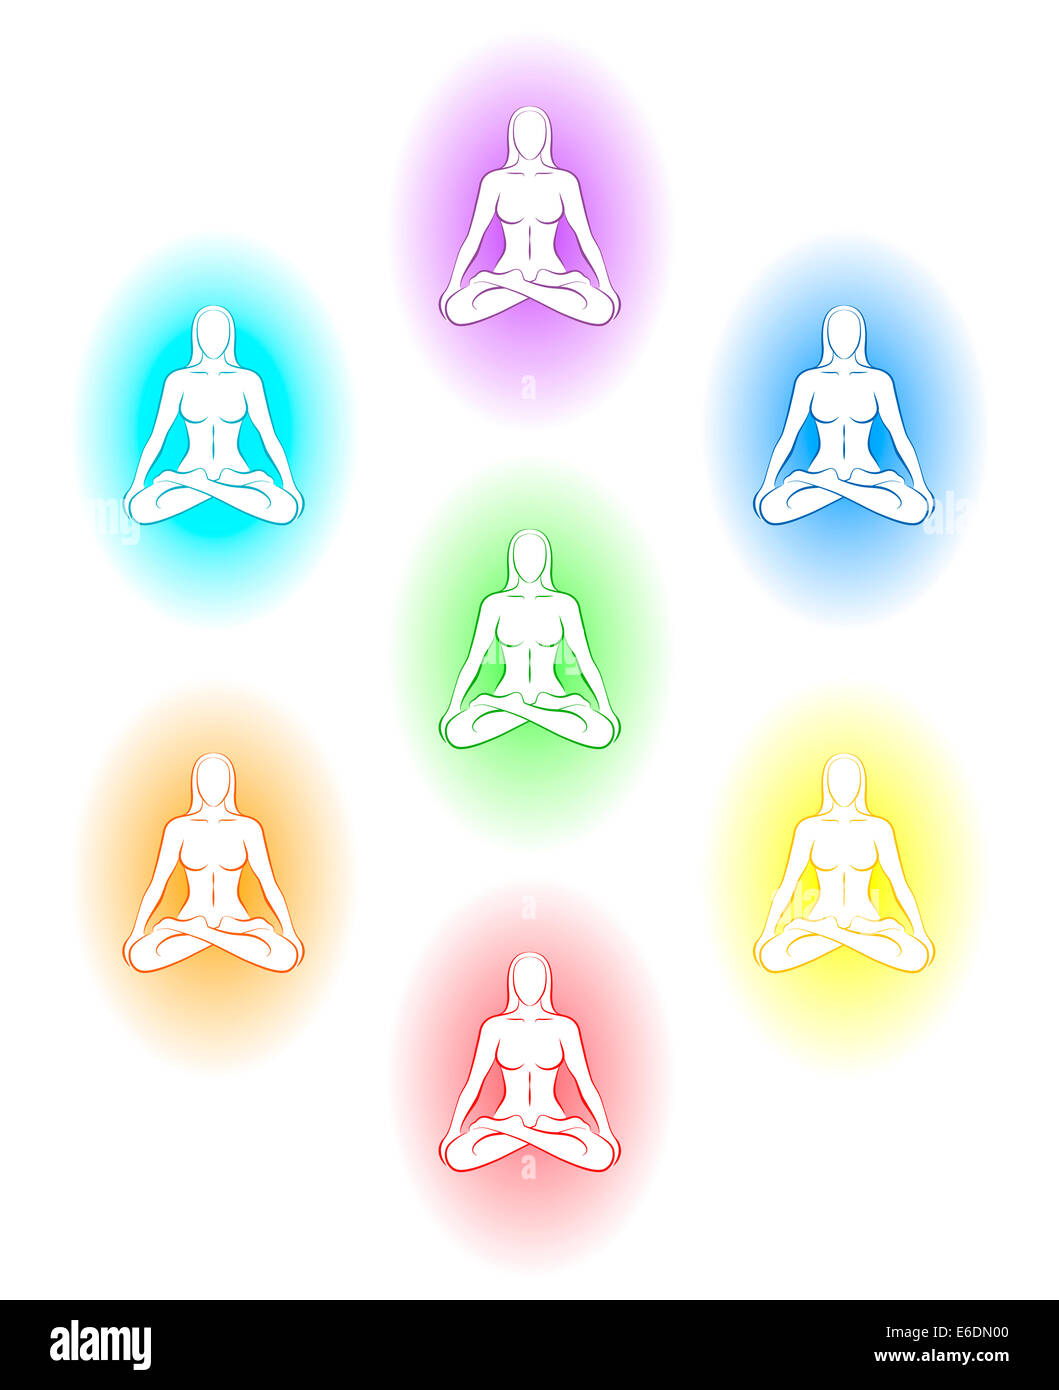 Meditating woman with different aura colors of her subtle body. Stock Photo